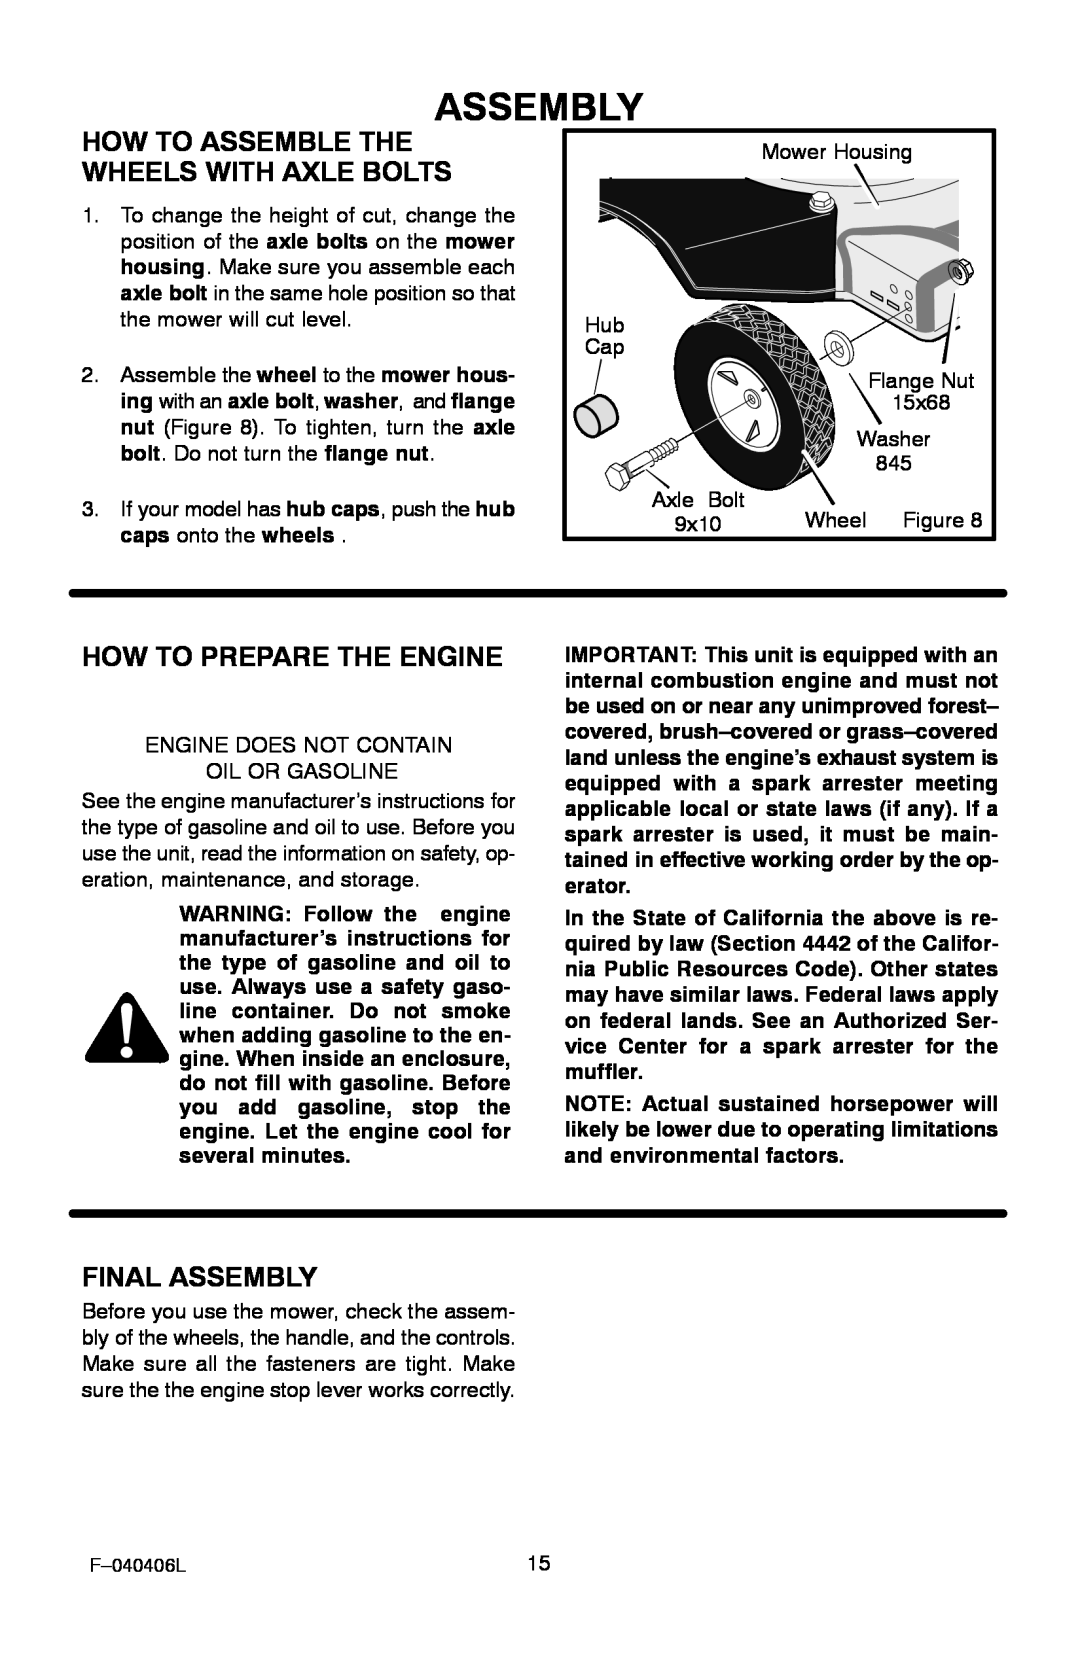 Murray 20-inch How To Assemble The Wheels With Axle Bolts, How To Prepare The Engine, Final Assembly, Mower Housing 